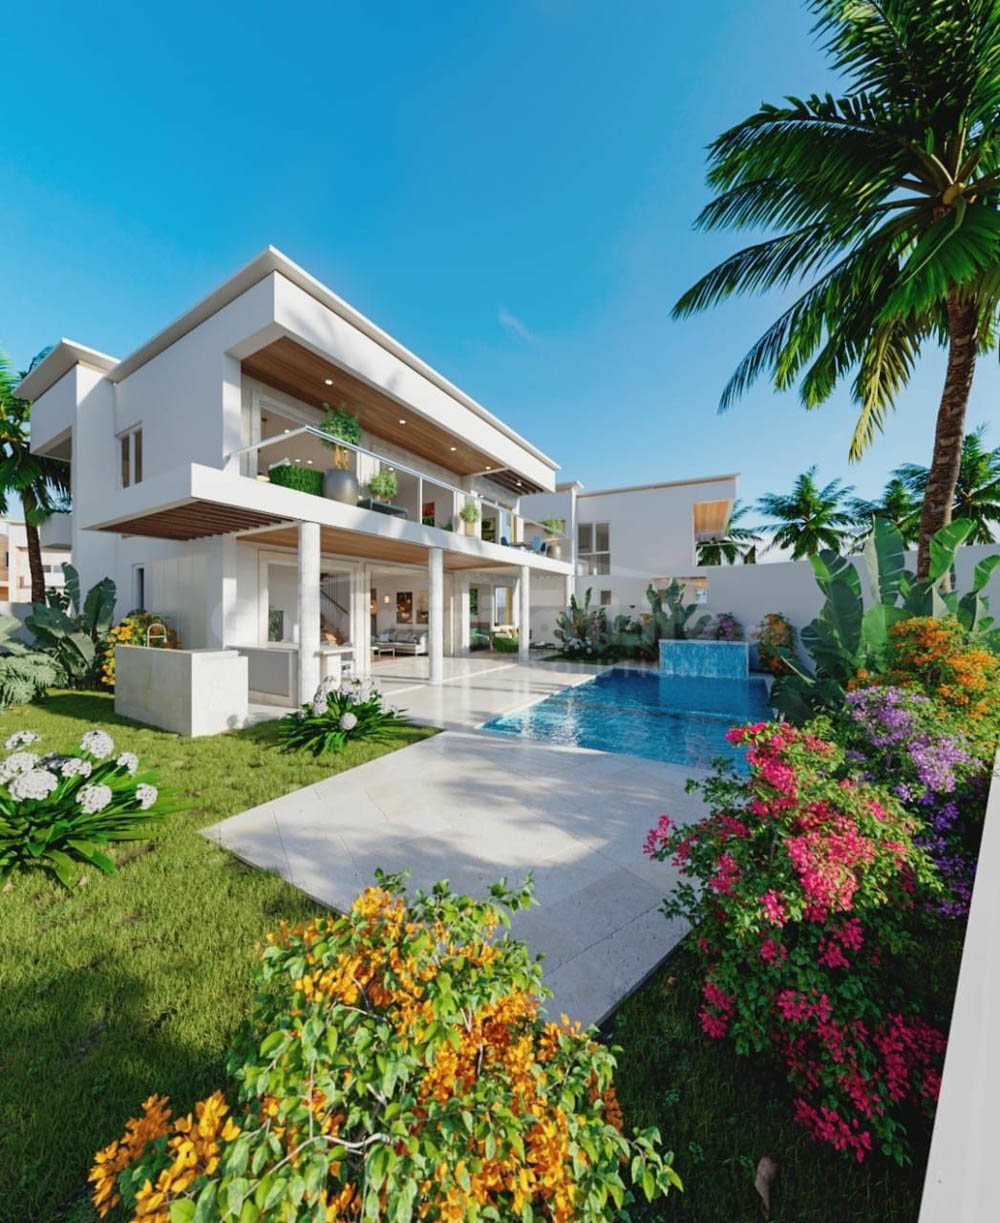 Brand New Villa just Walking Distance from the Center of Cabarete, # 5